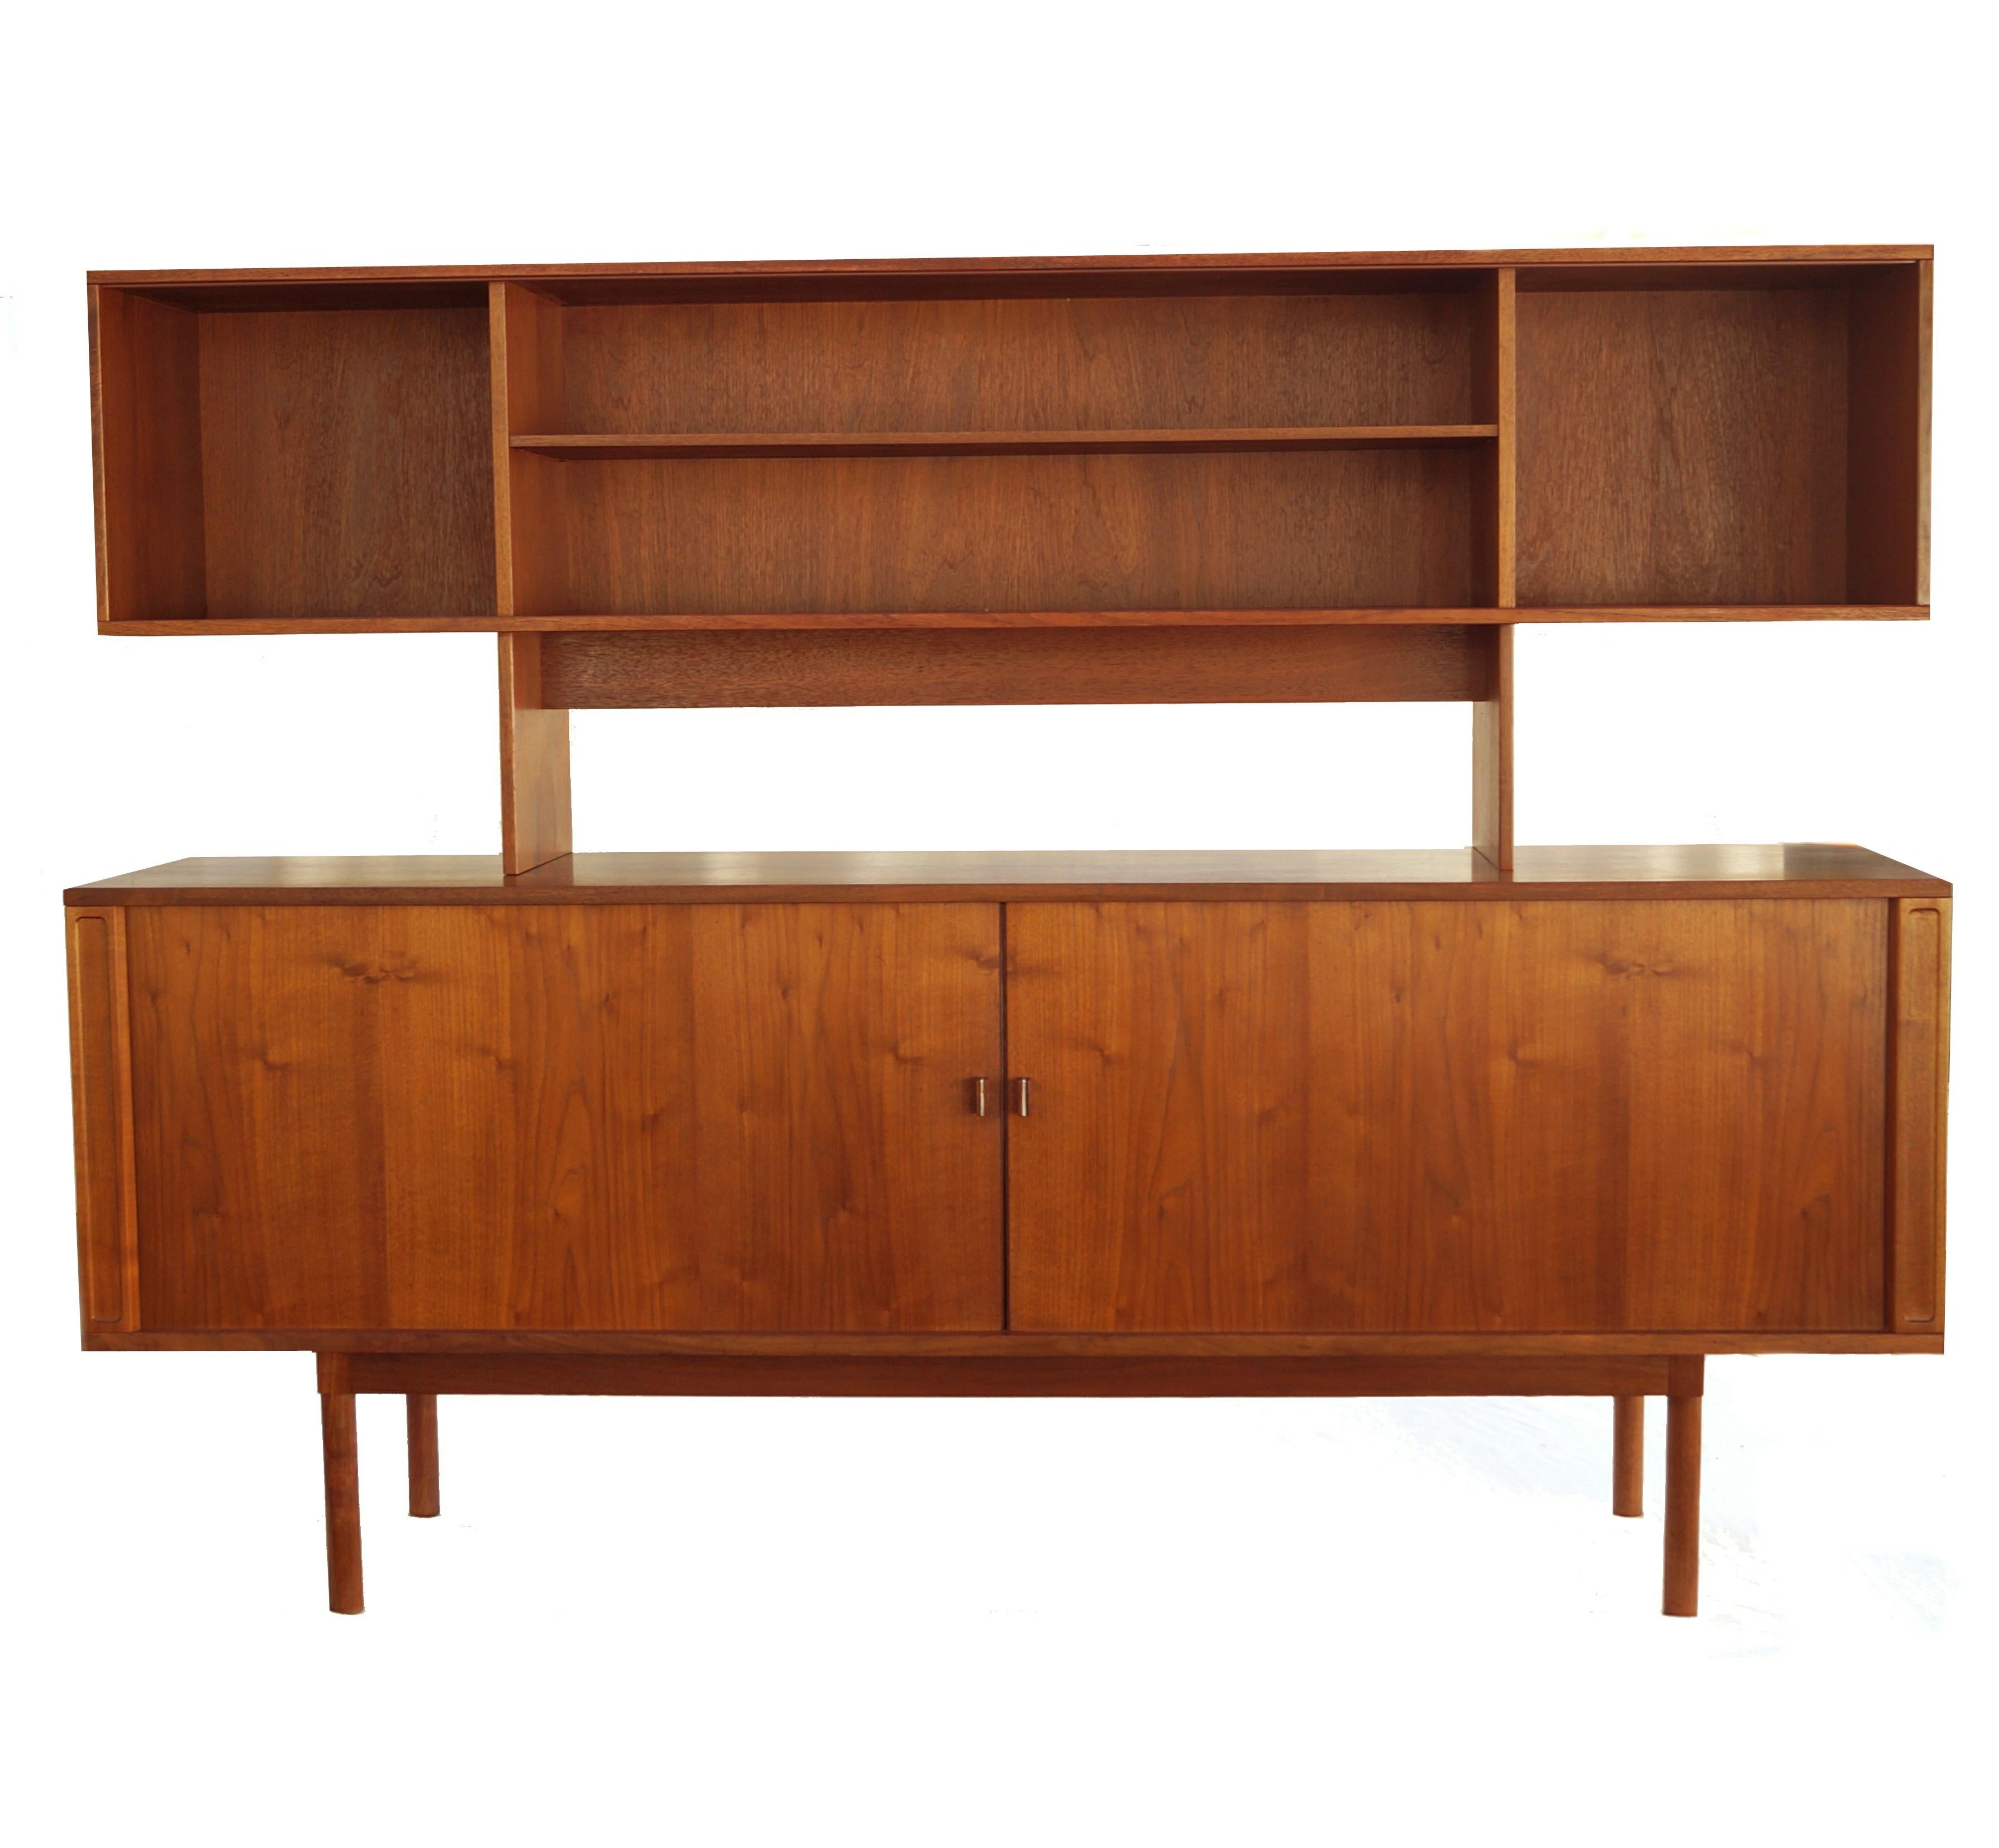 Danish modern Tambour door credenza cabinet buffet with Hutch Jens H. Quistgaard for Lovig. It features 4 adjustable drawers and a shelf on either side. The hutch has 1 shelf. The credenza alone measures 78 and 7/8